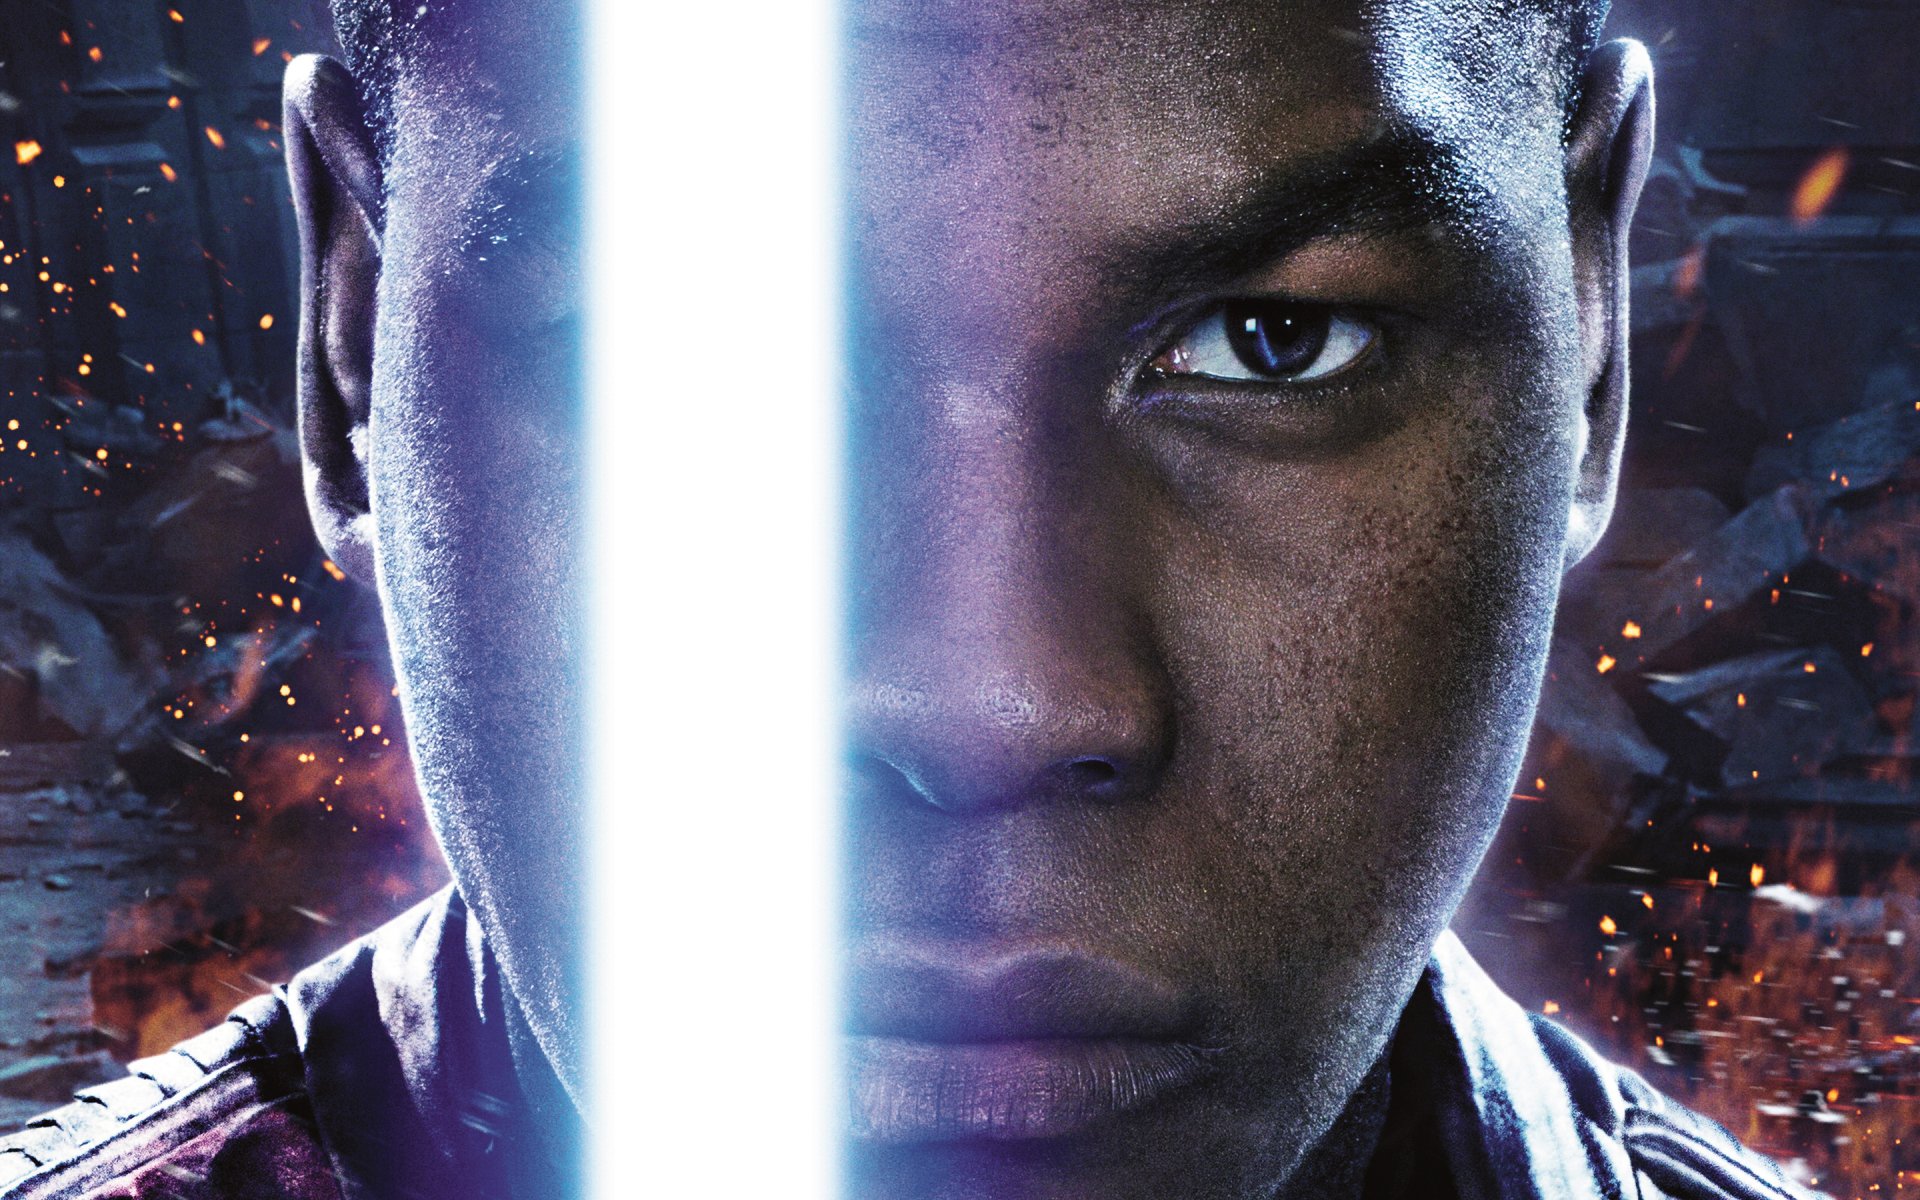 Star Wars Ep. VII: The Force Awakens download the new version for ipod